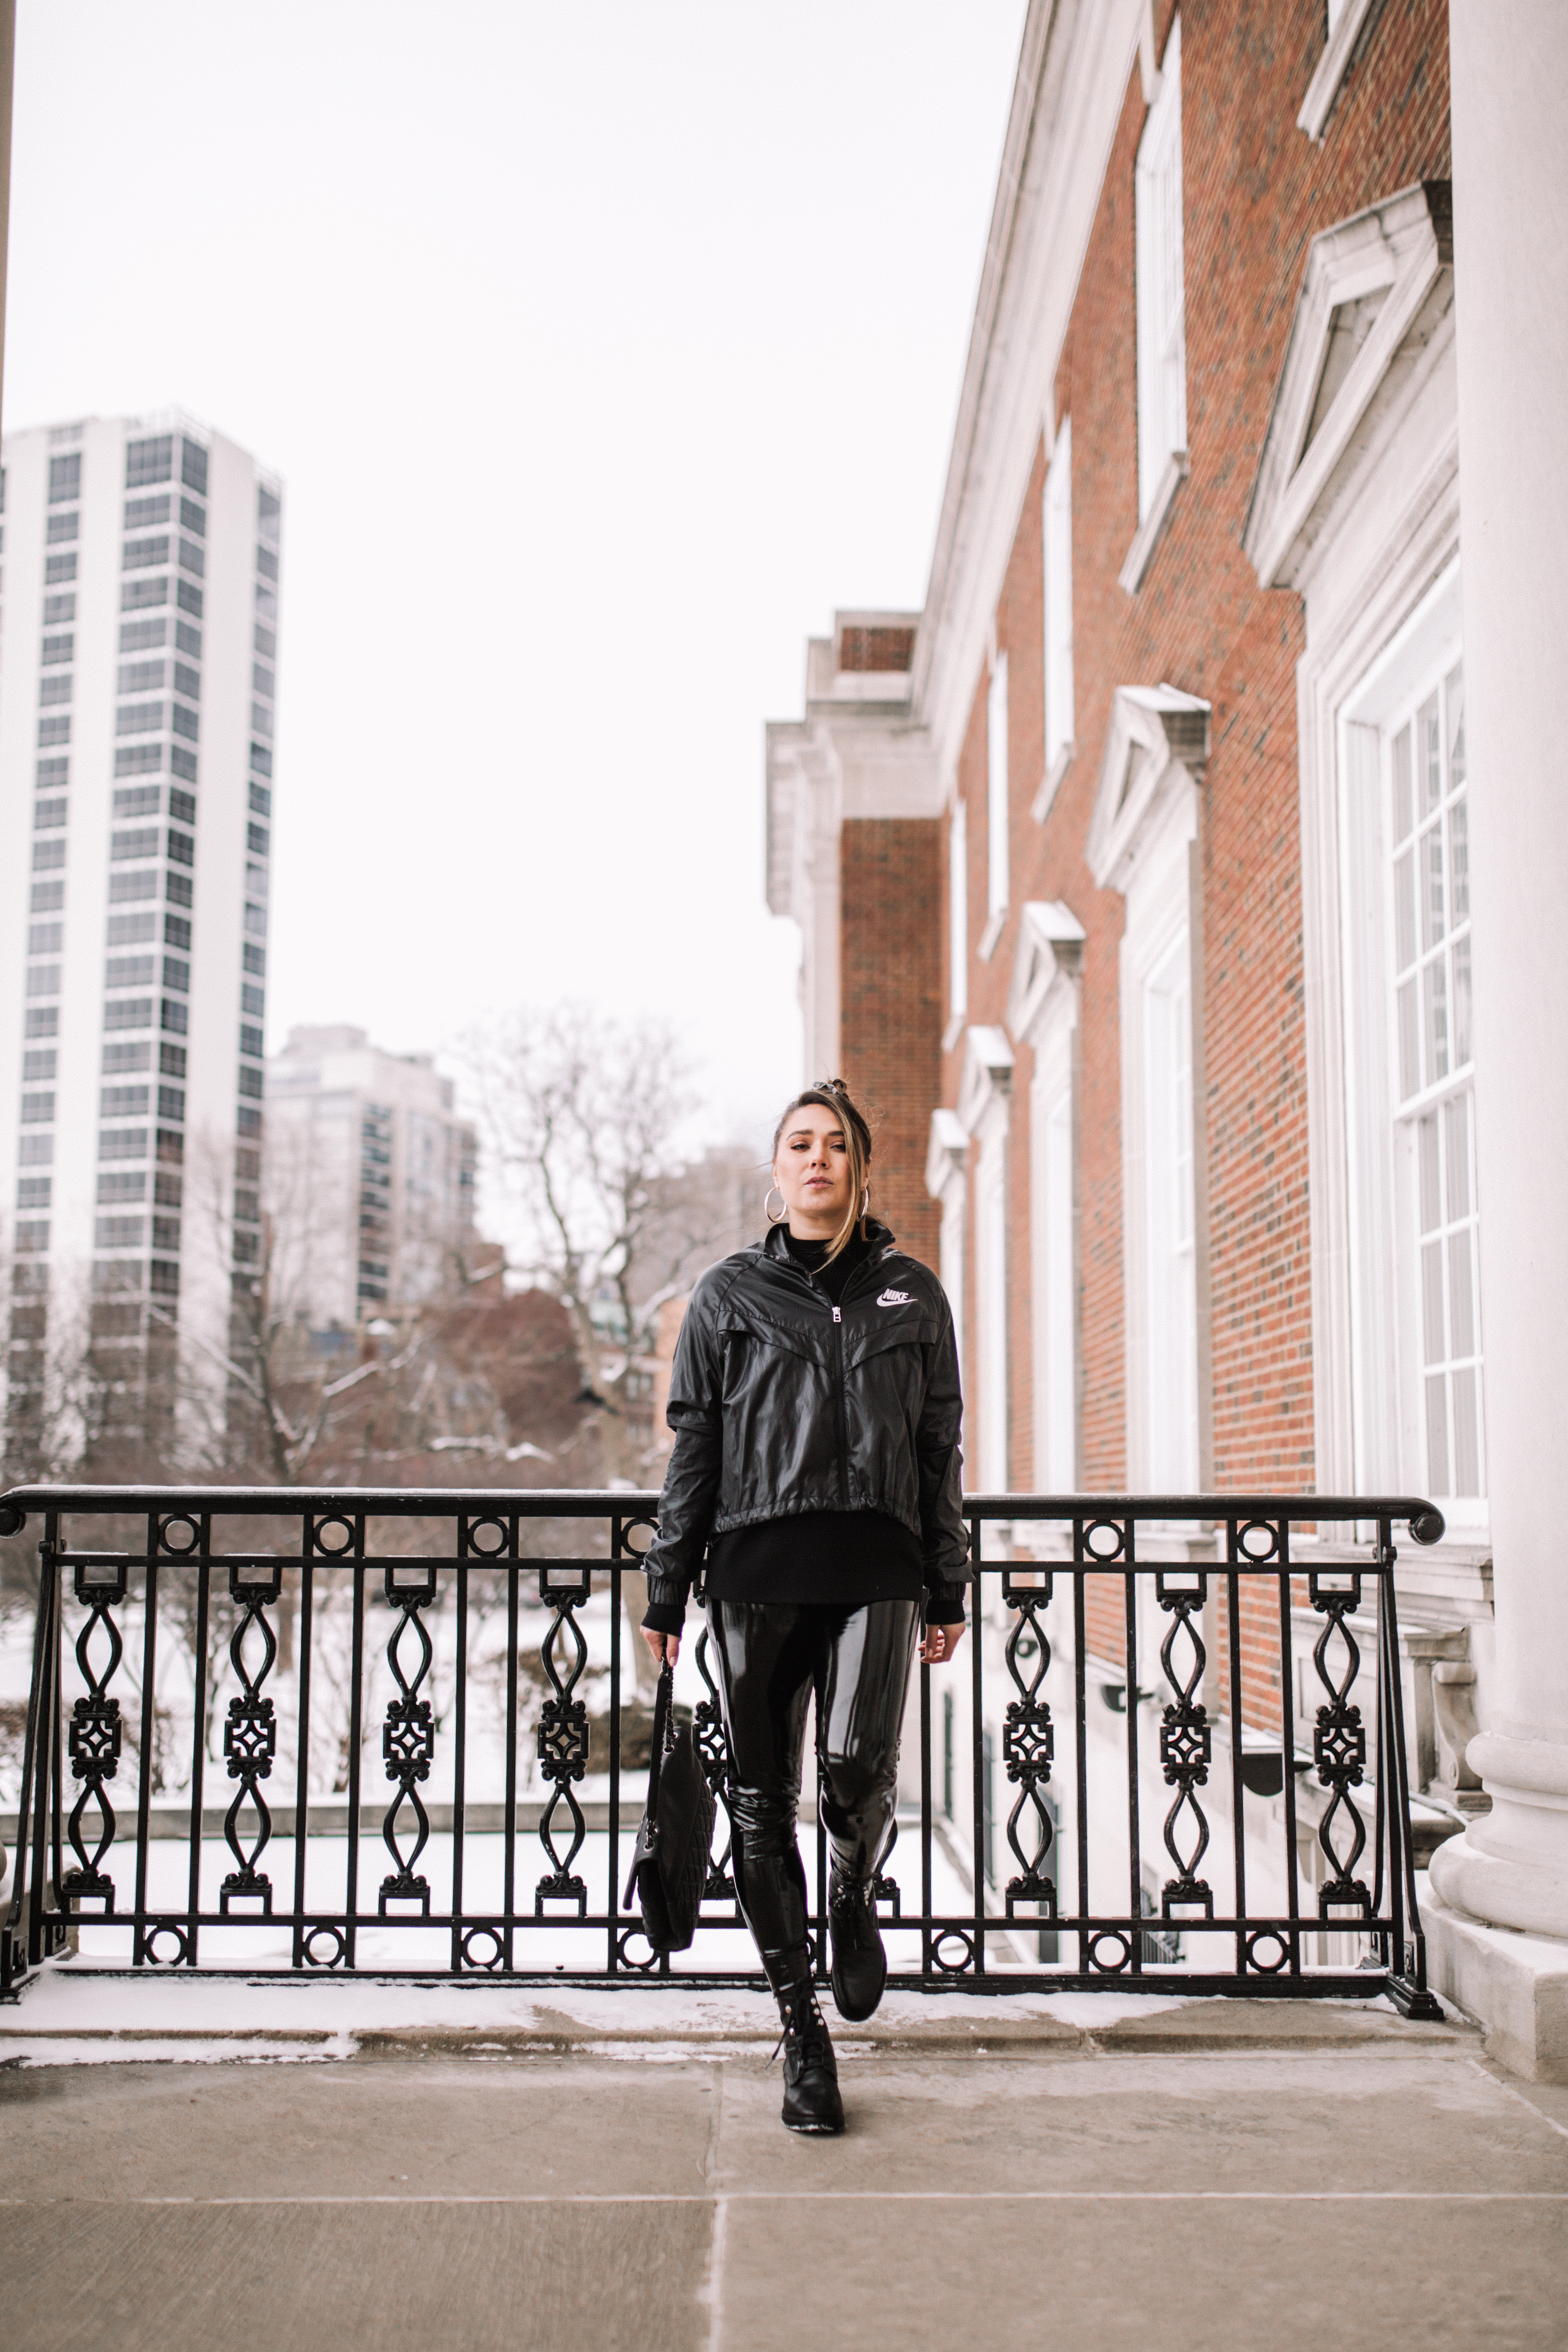 cool-girl-nike-outfit-commando-patenet-leather-legging-combat-boot-all-black-layers-nike-windbreaker